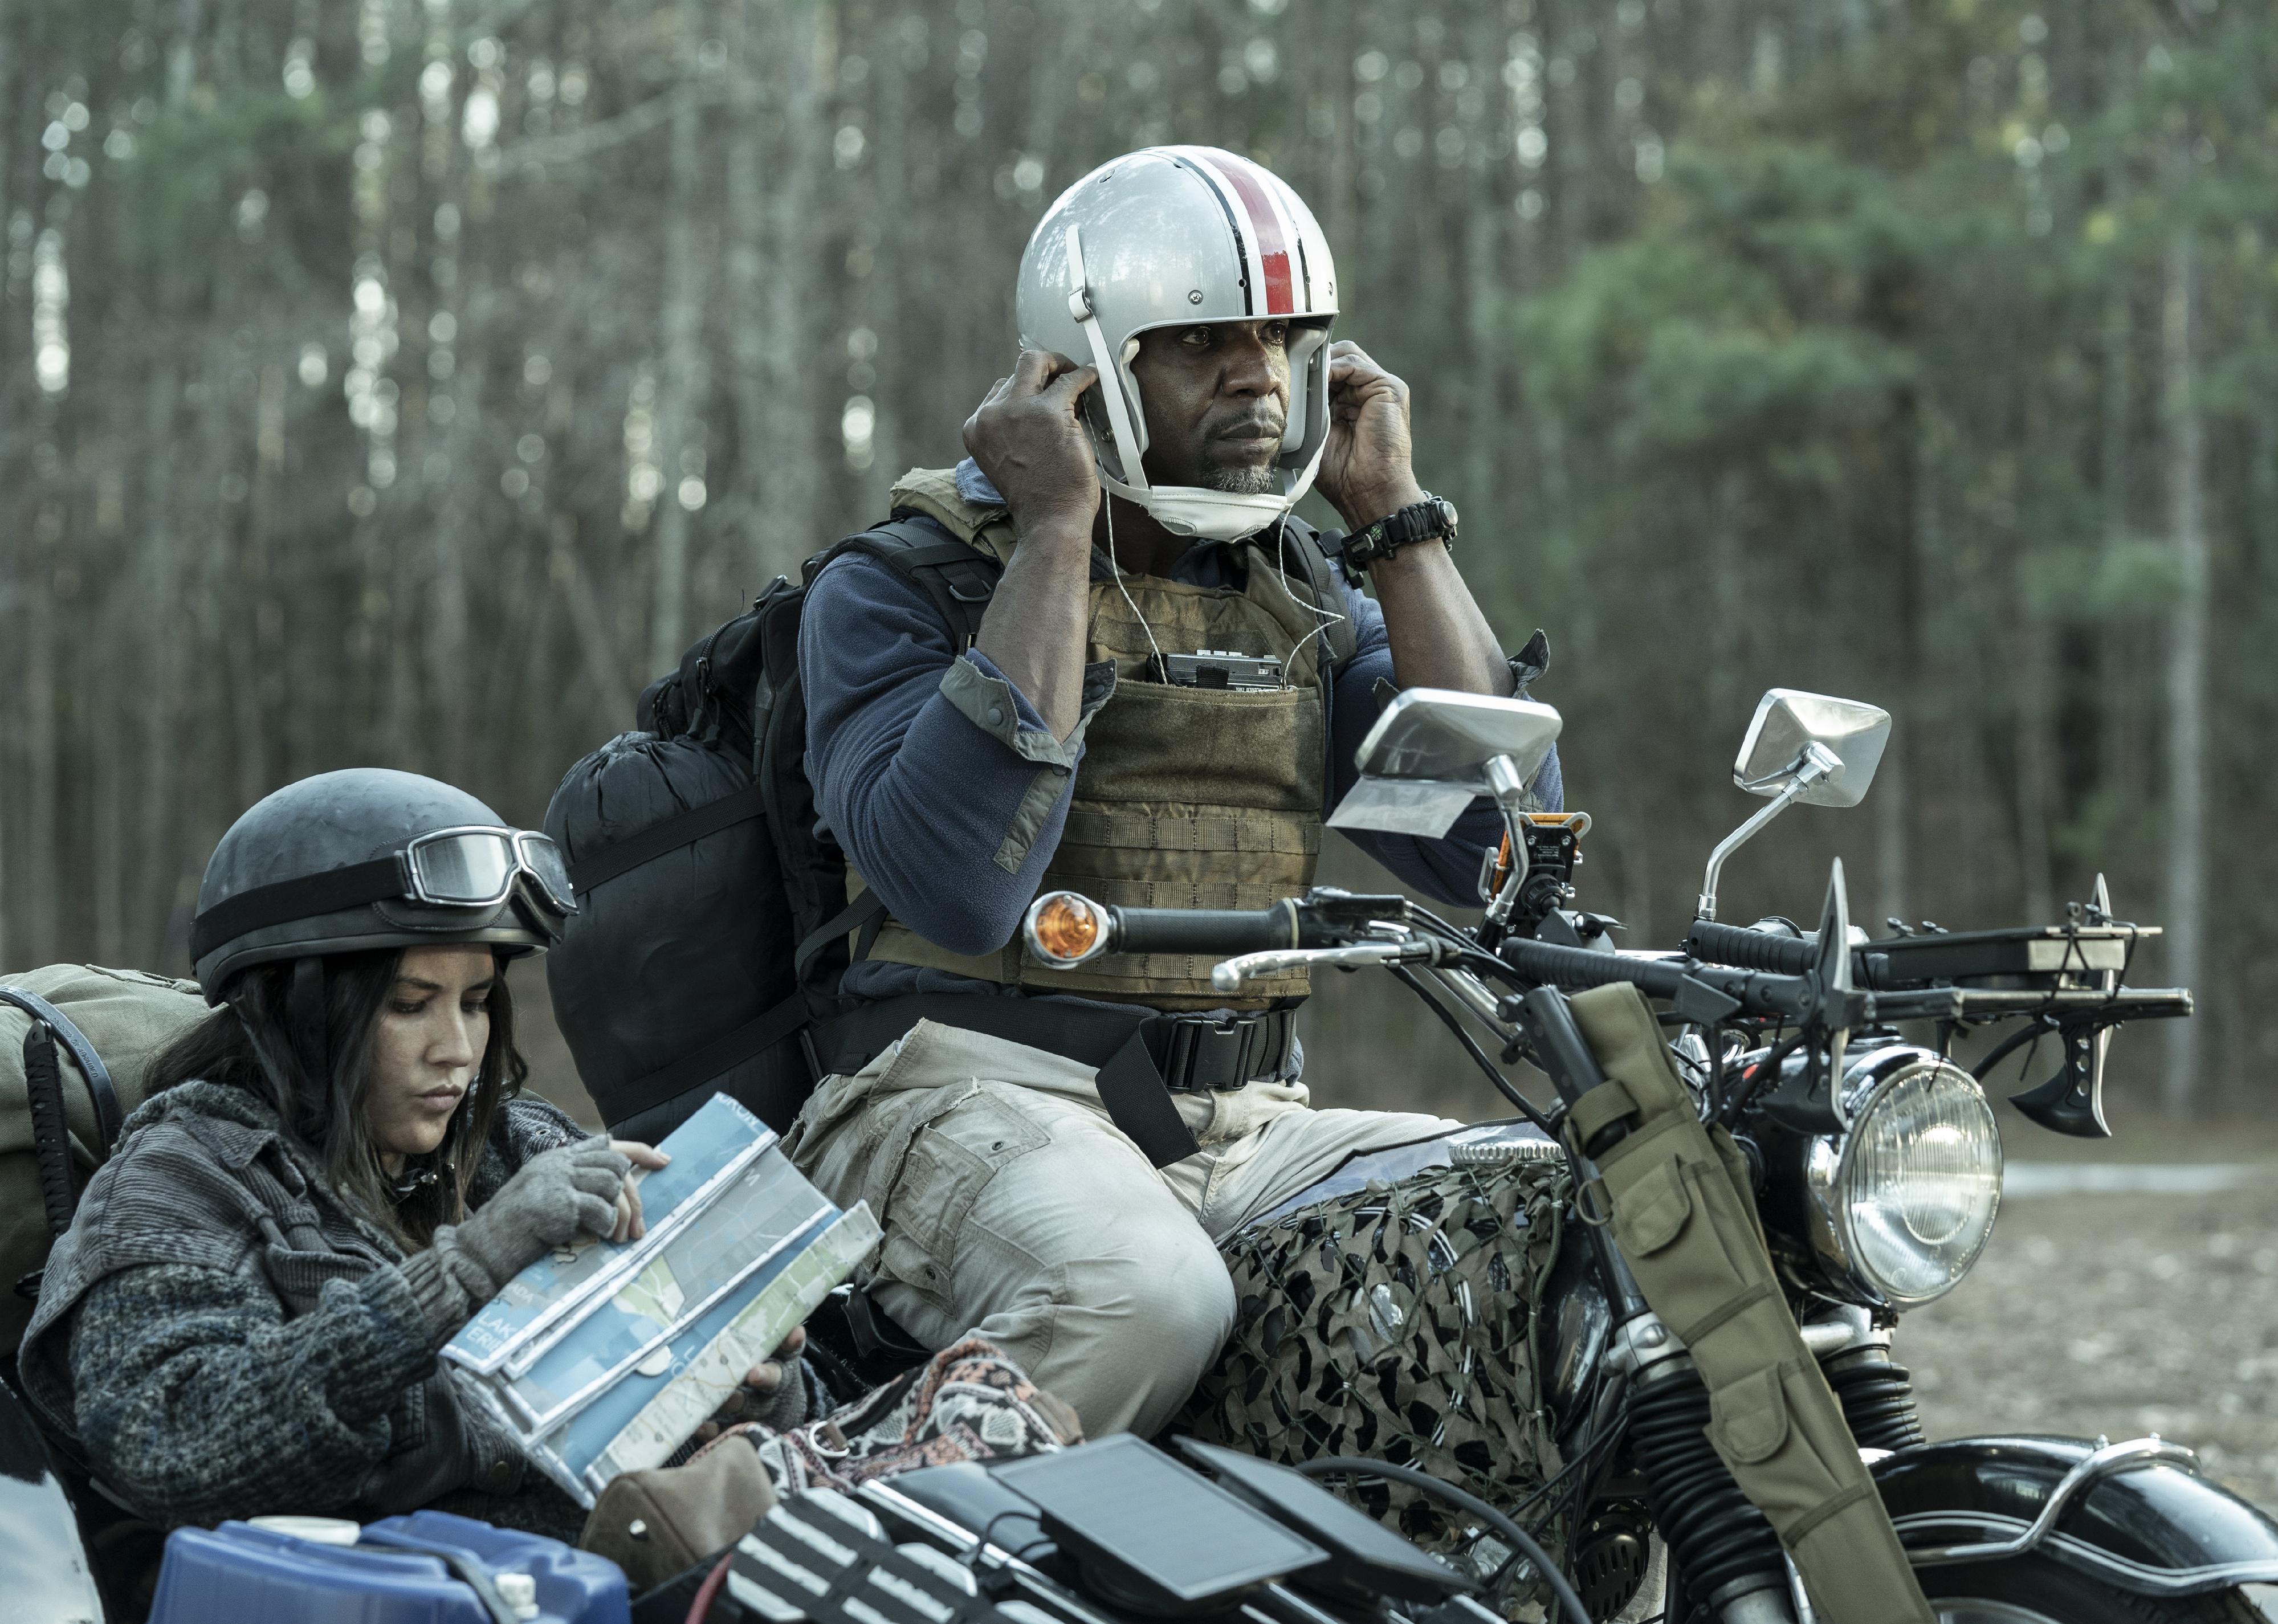 Terry Crews and Olivia Munn wearing makeshift survival gear riding a motorcycle with sidecar.